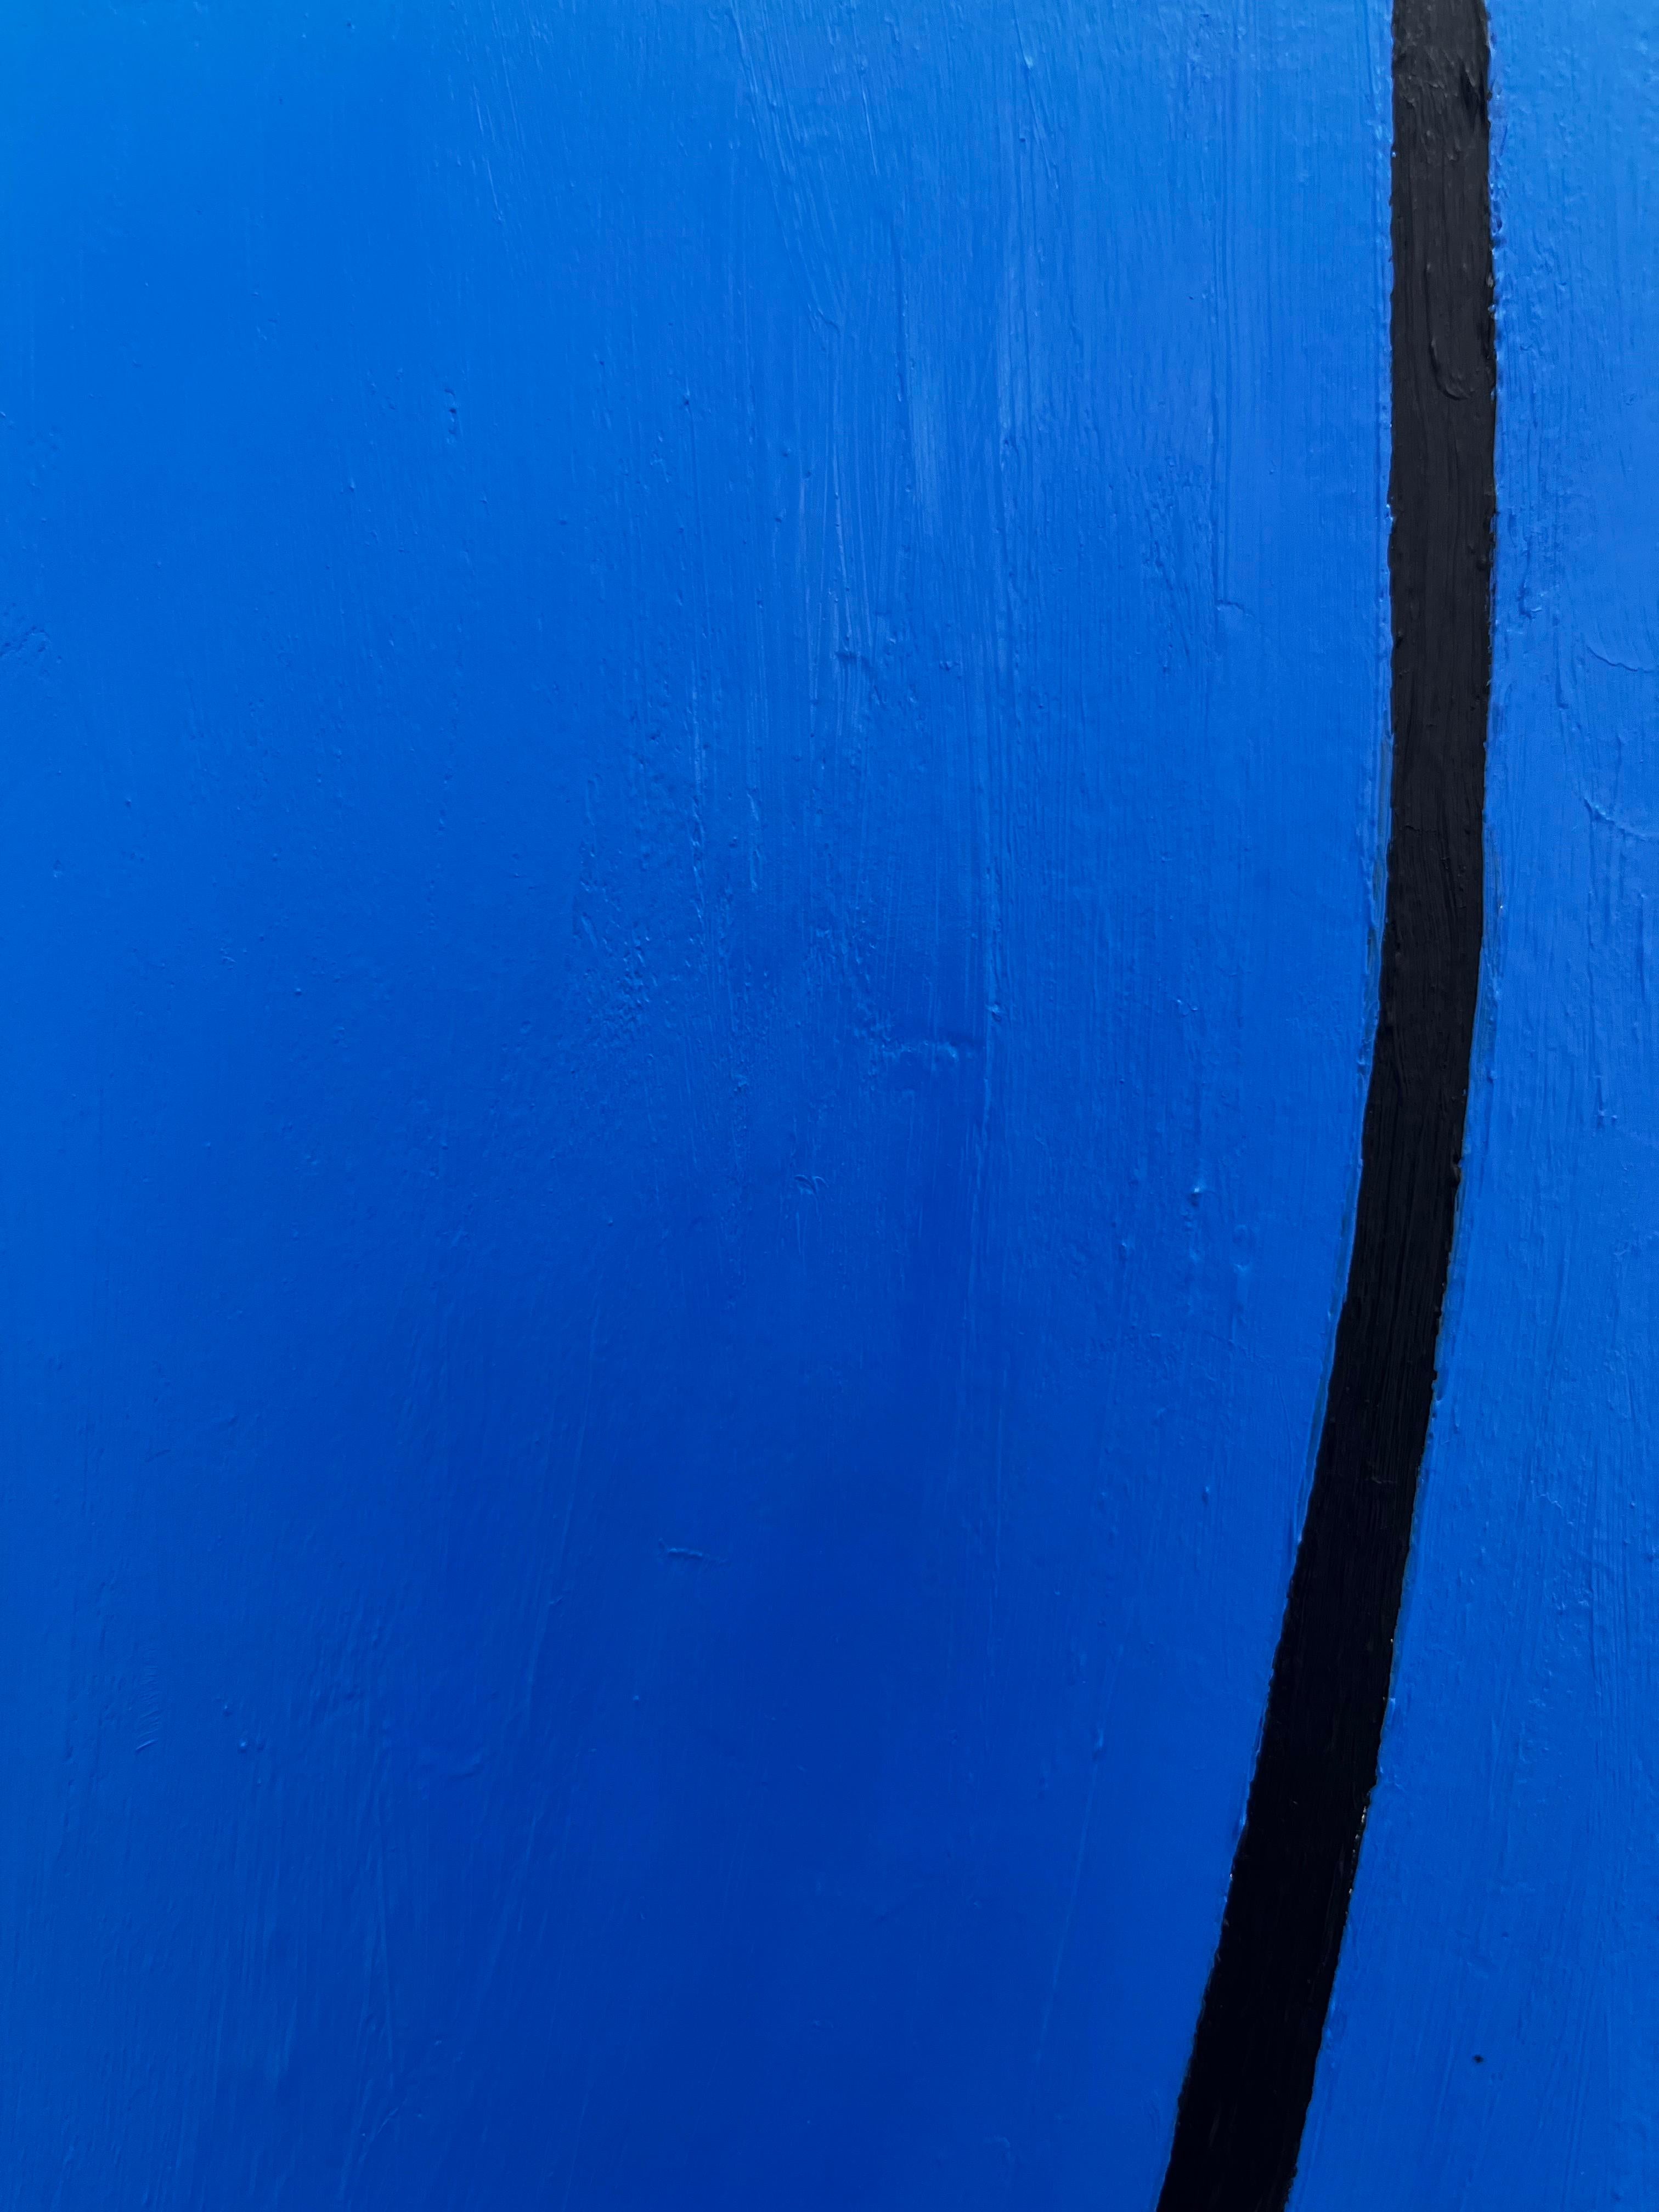 Untitled - abstract oil painting, lines, blue & black - Painting by Nicolás Guzmán